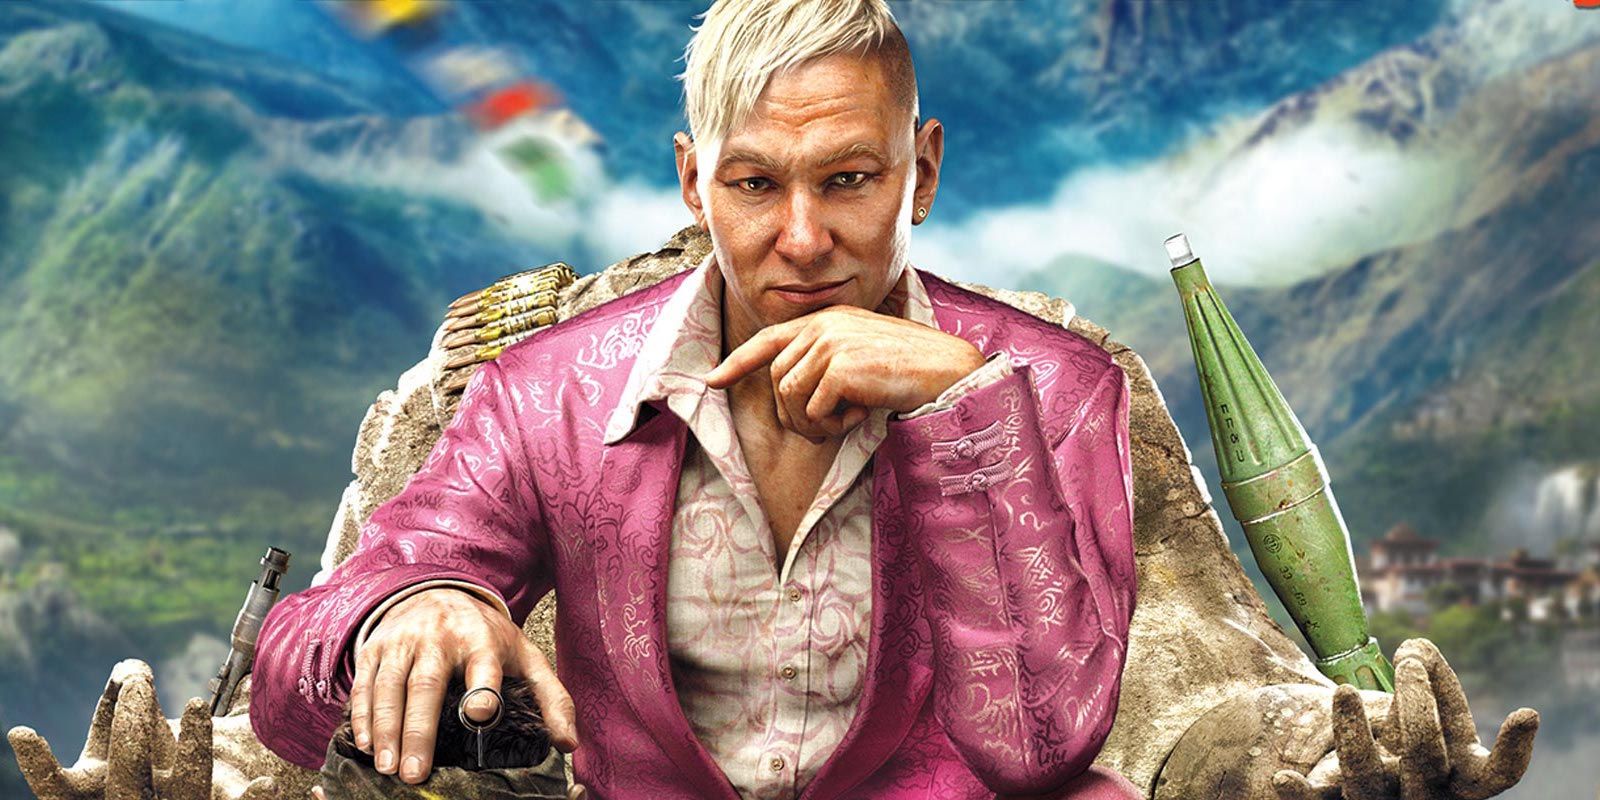 Some Far Cry DLCs appear to be canon despite Ubisoft not clarifying one way or the other.